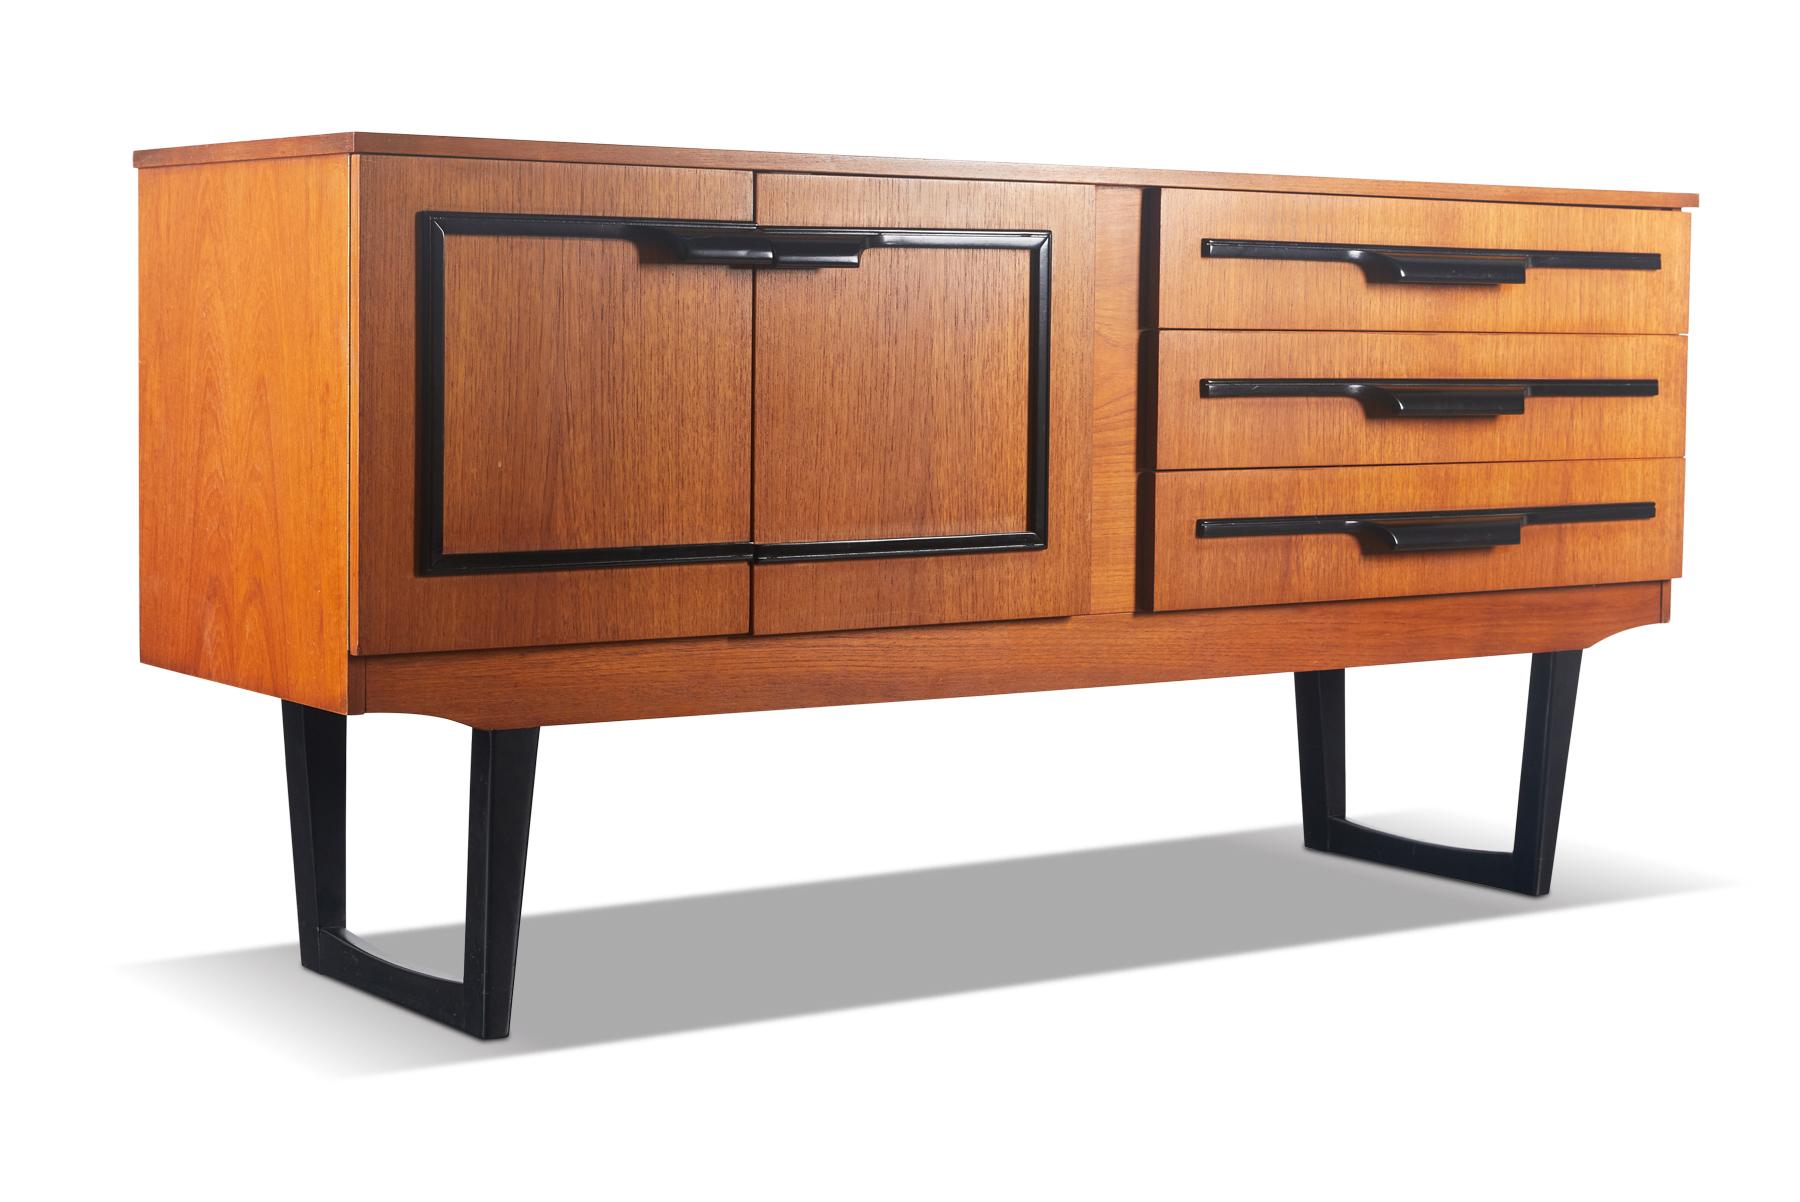 English Modern Midcentury Credenza in Teak with Black Lacquer Accents 4